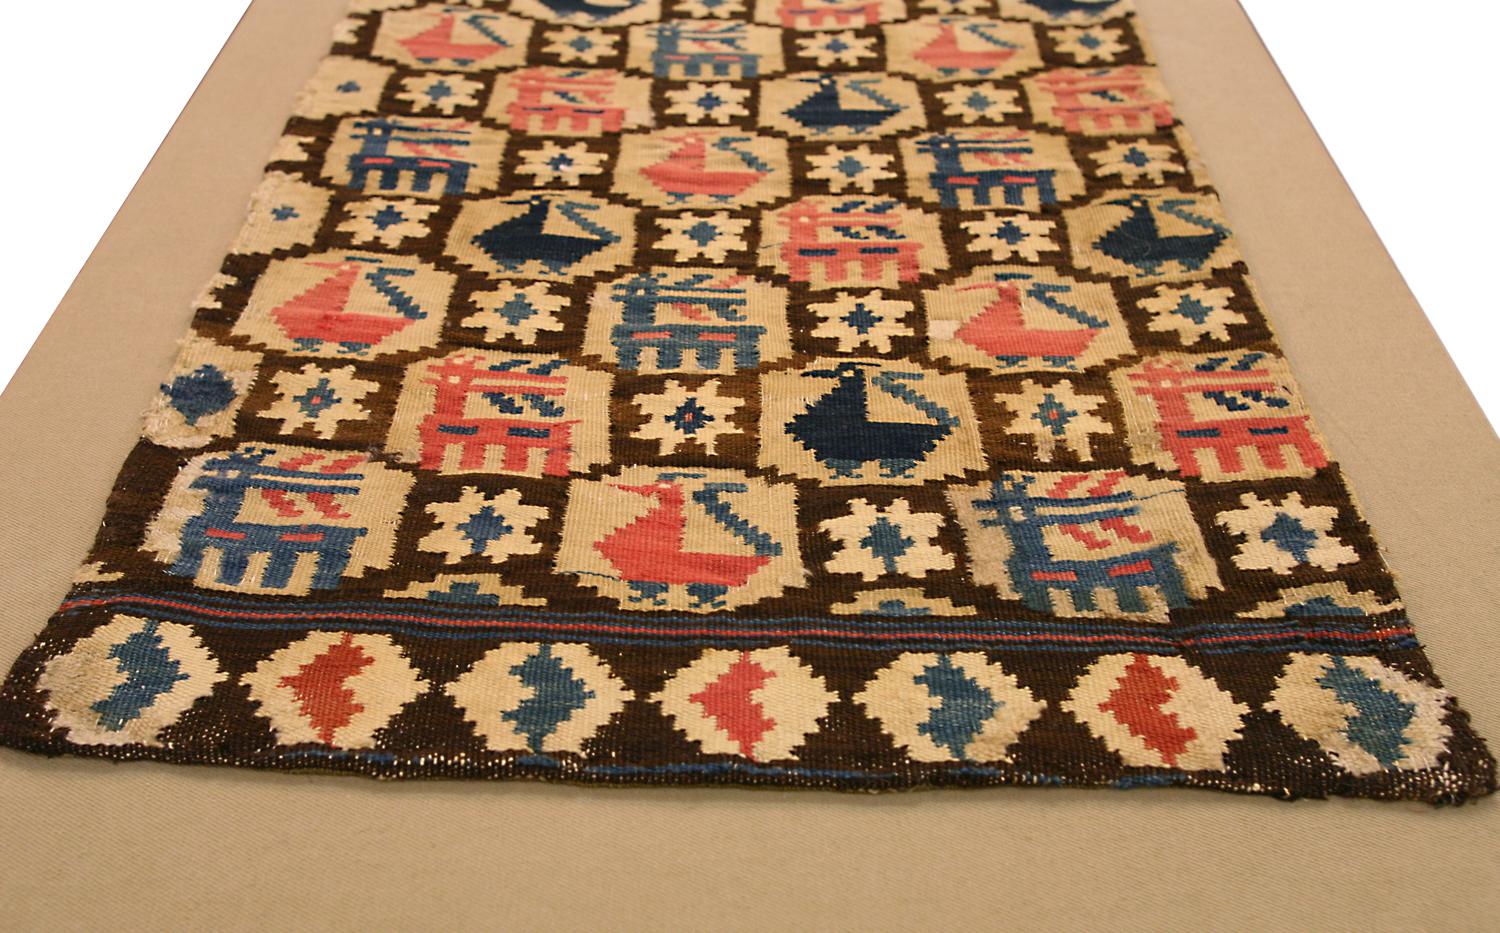 This is an antique Rollakan textile woven in Sweden during the 19th century and measures 90 x 47CM in size. the design of this piece is comprised of rows of alternating dears and Peacocks enclosed in a lattice design set on a beige background color.